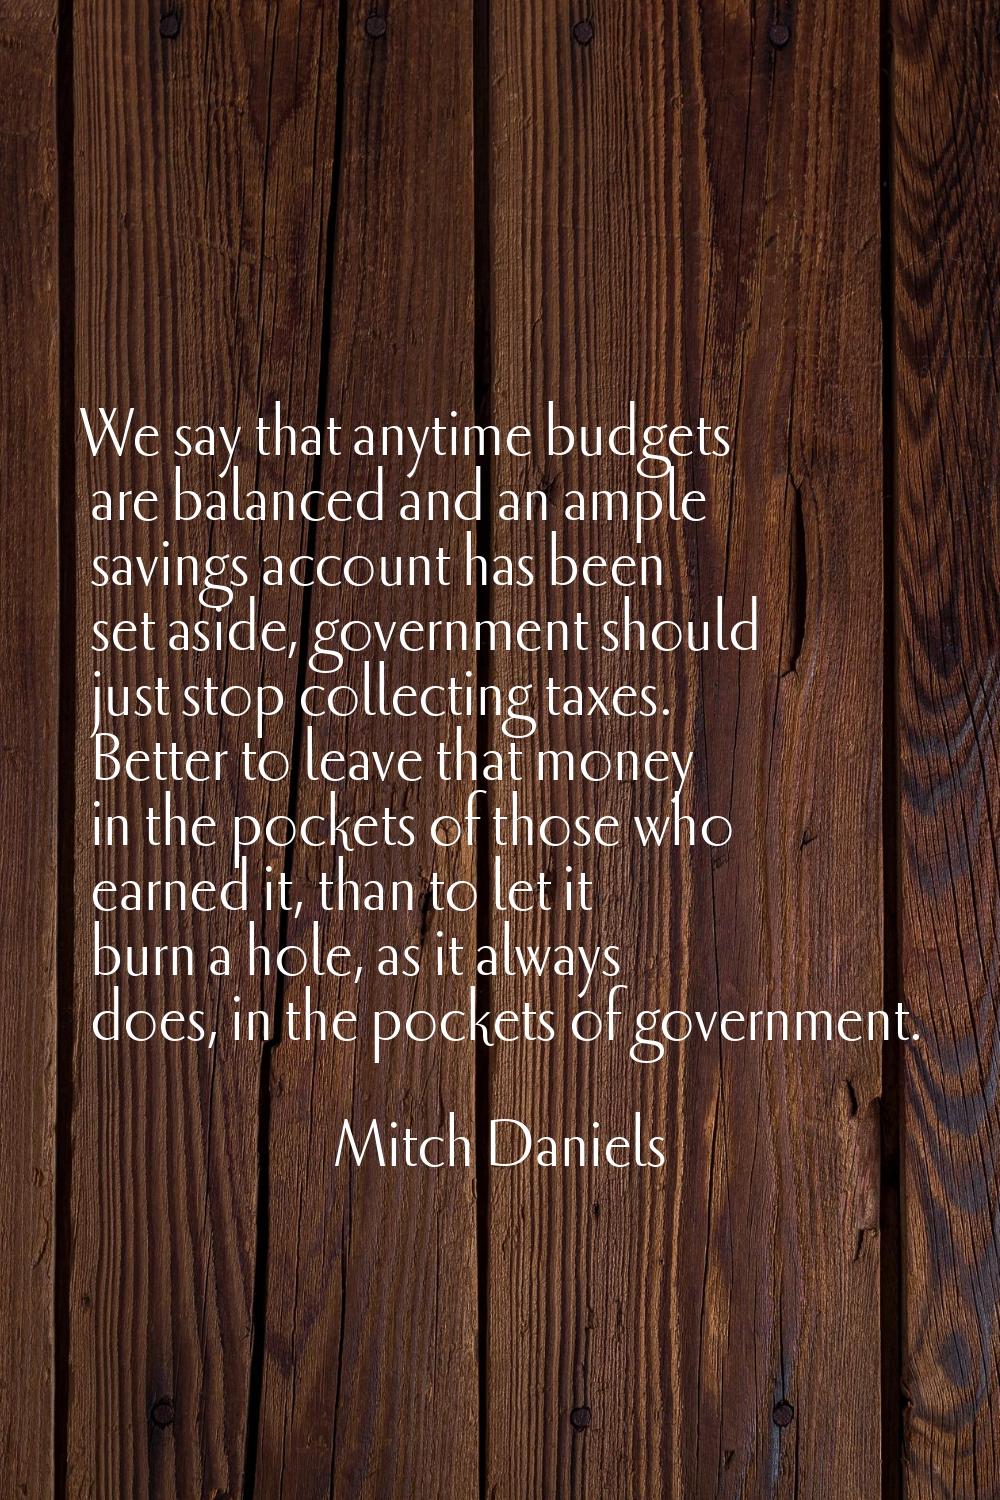 We say that anytime budgets are balanced and an ample savings account has been set aside, governmen